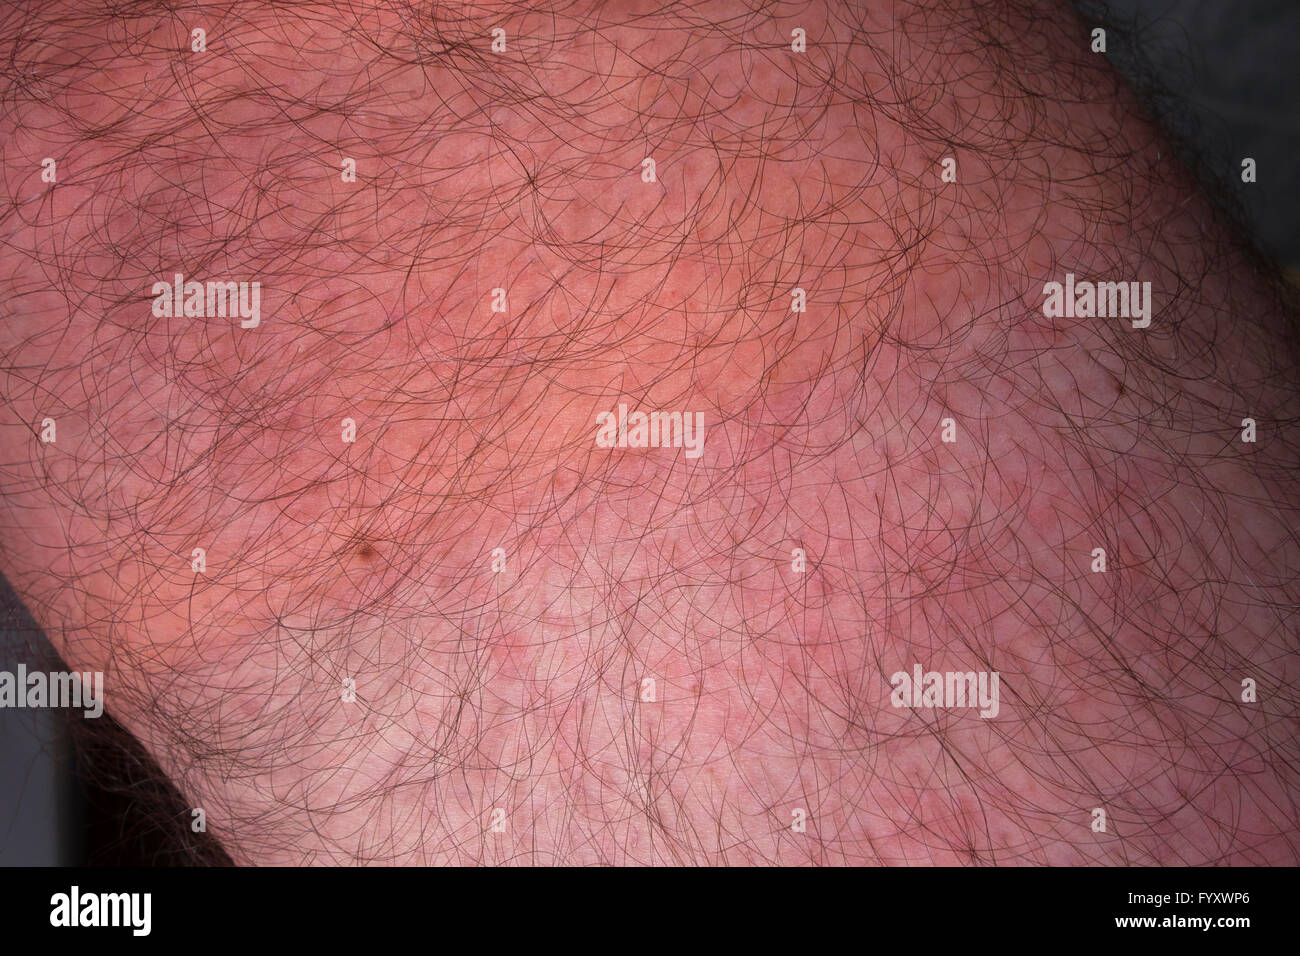 Urticaria on upper thigh of middle-aged man after outdoor exercise in cold 0°C temperature (clothing thinner on upper leg) Stock Photo